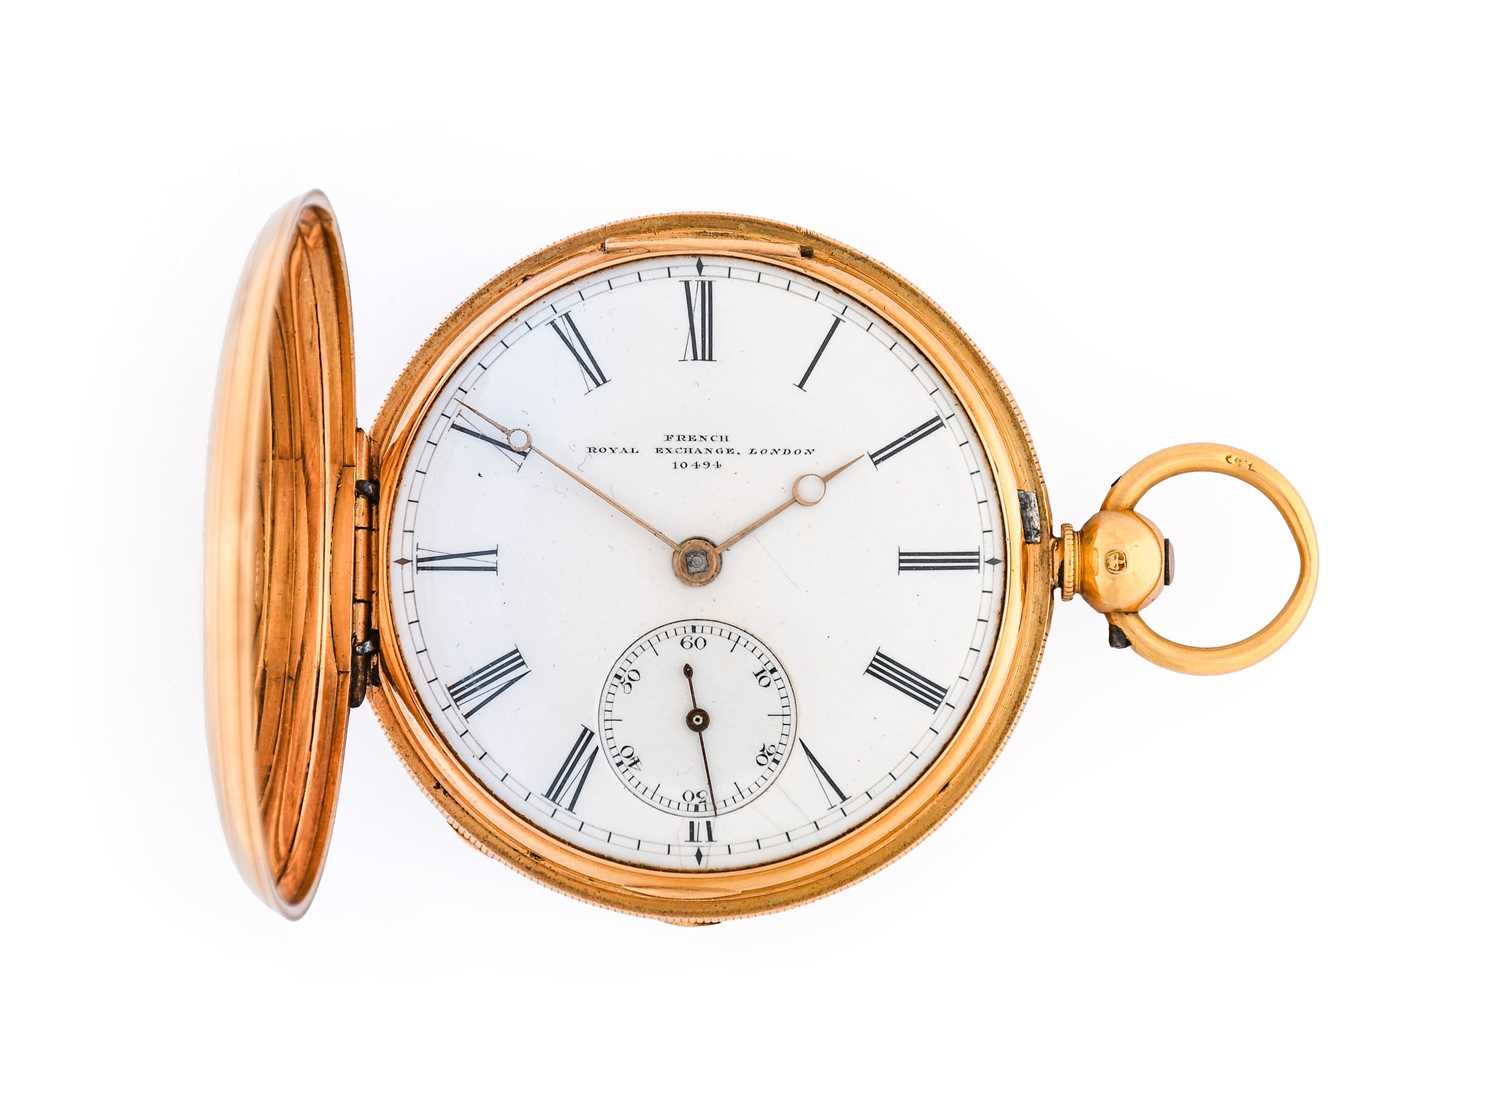 French: An 18 Carat Gold Duplex Full Hunter Pocket Watch, signed French, Royal Exchange, London,